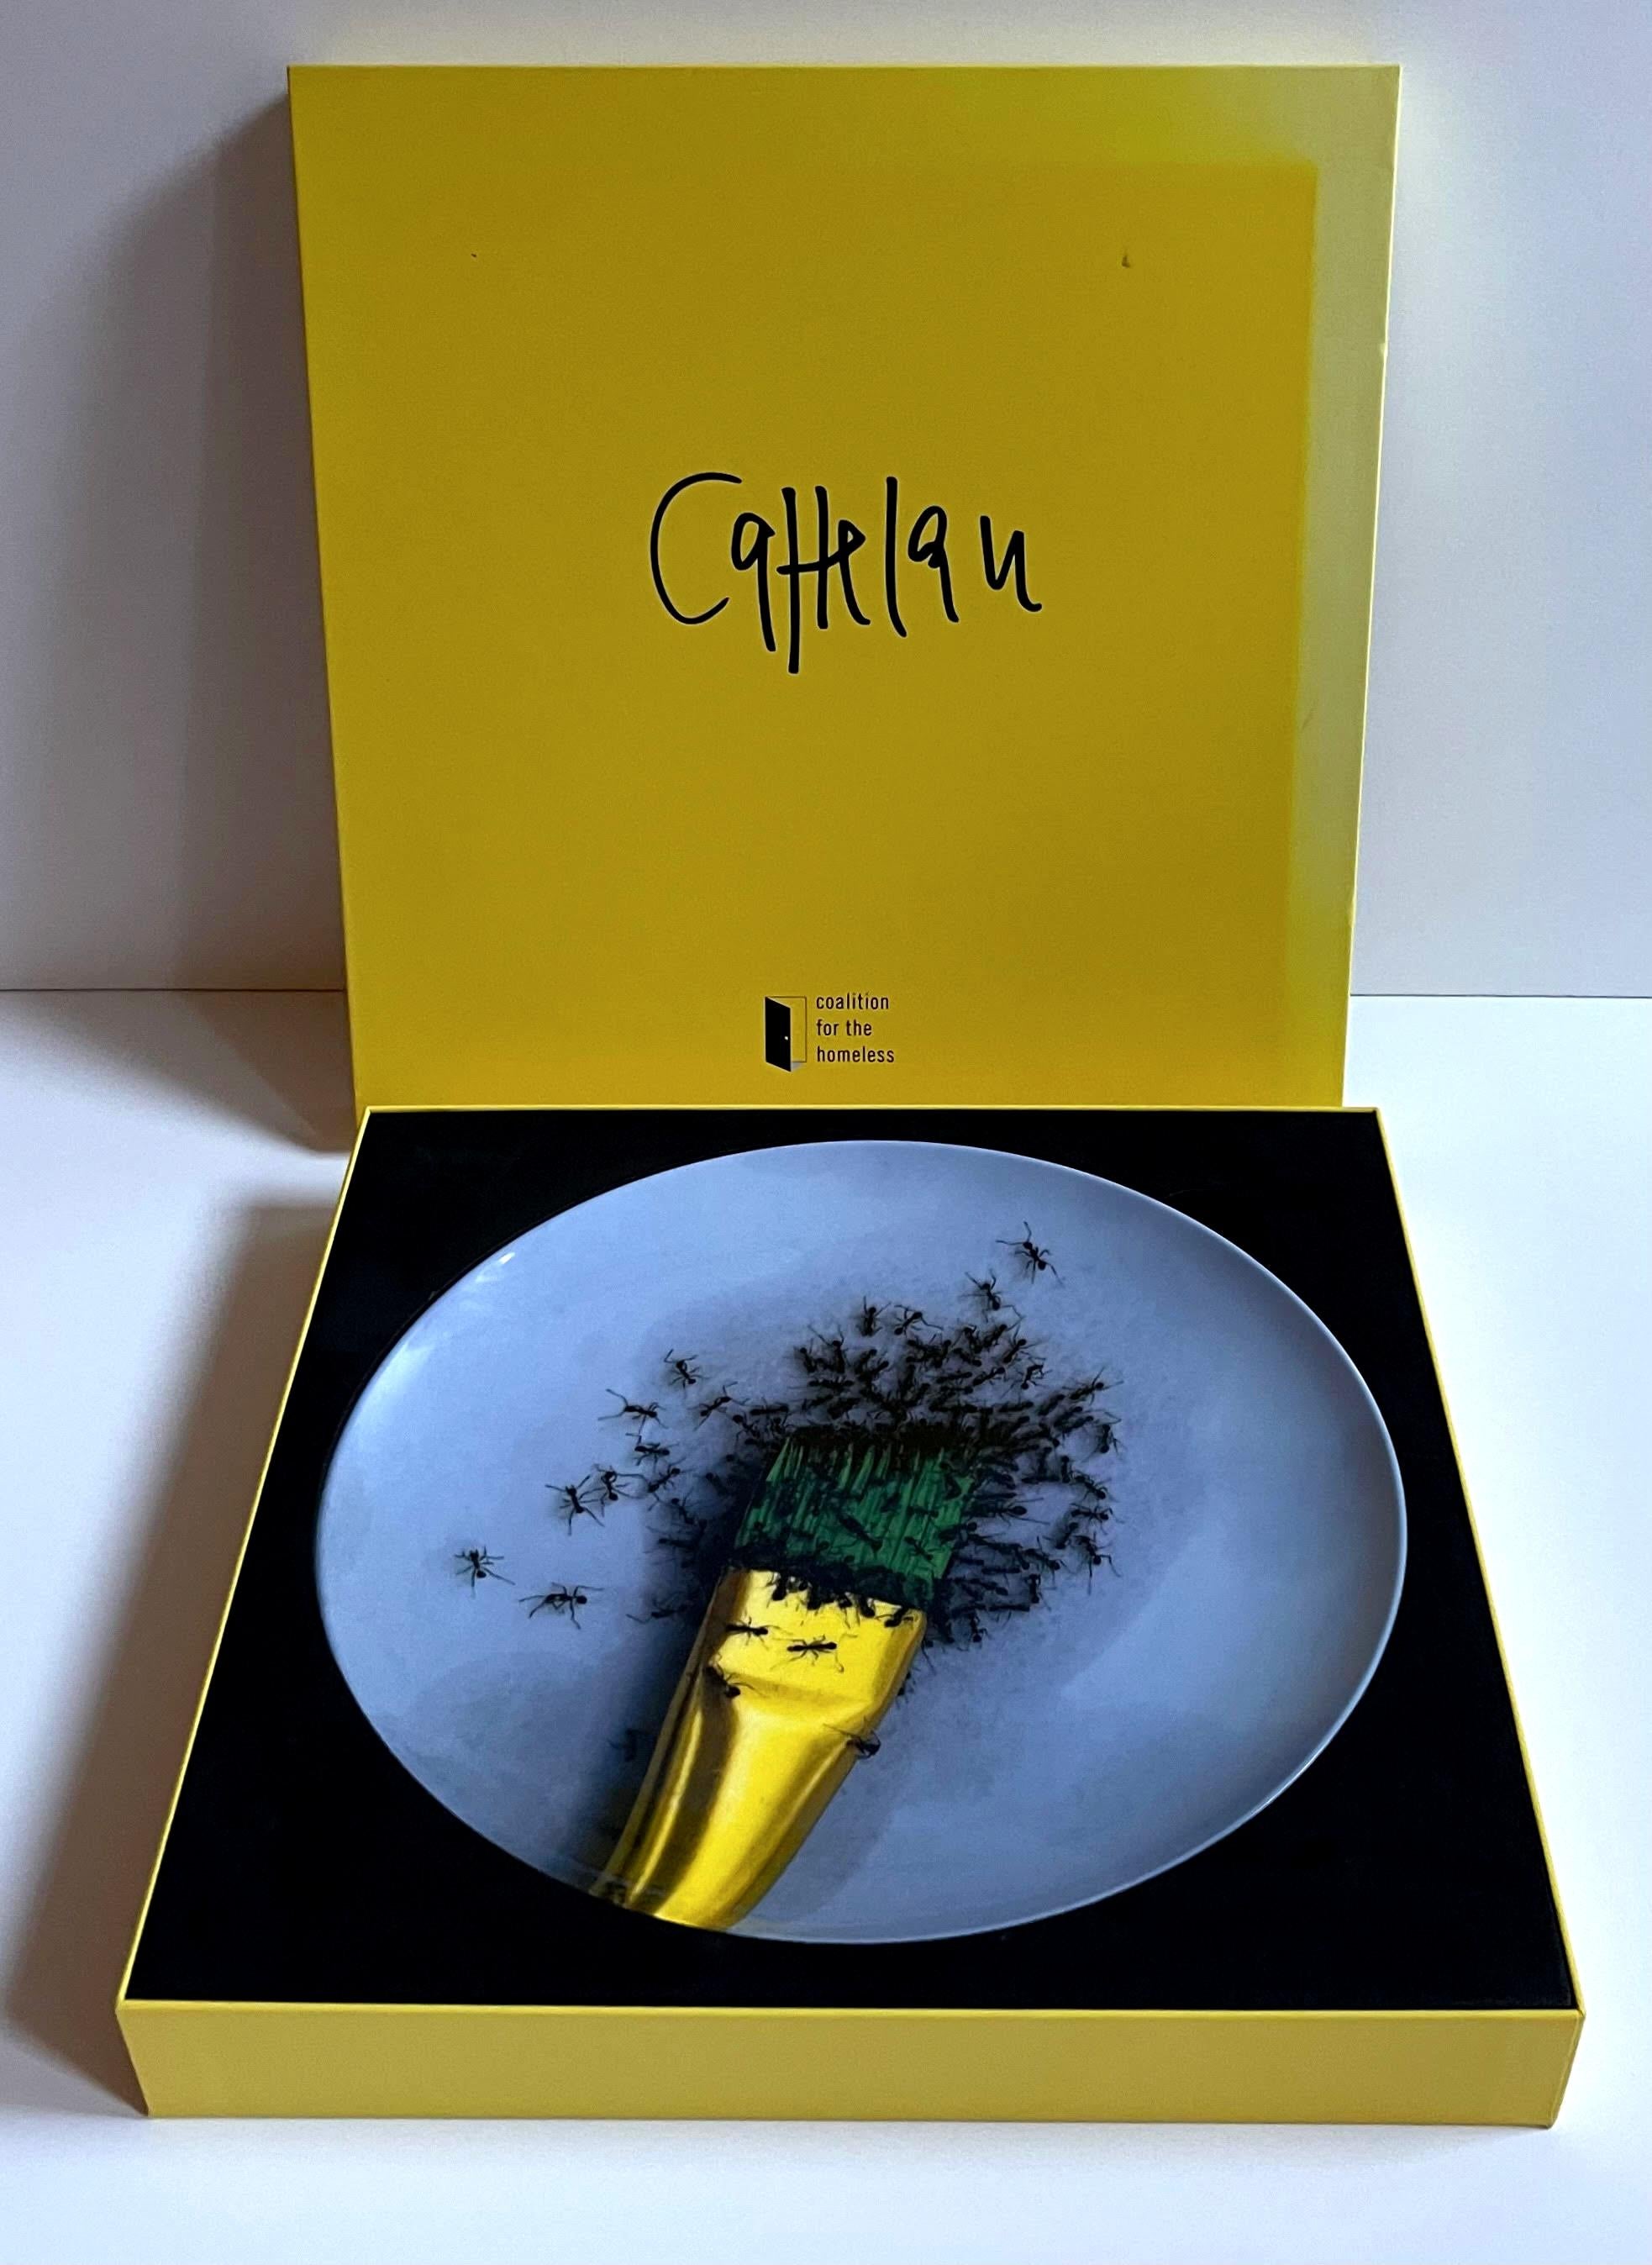 Untitled limited edition porcelain/ceramic plate in bespoke gift box (new)  - Contemporary Mixed Media Art by Maurizio Cattelan